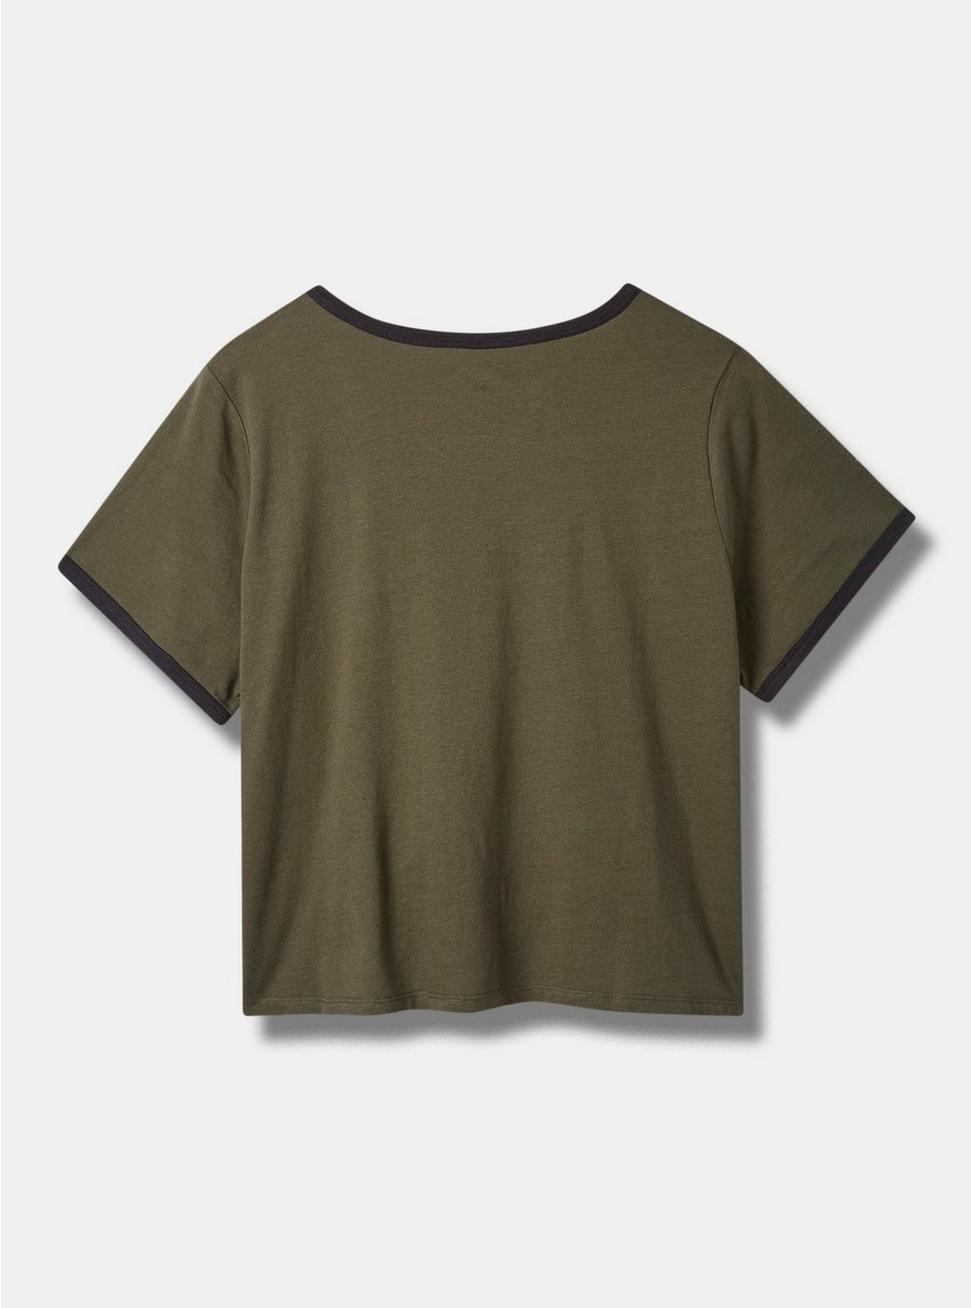 Jurassic Park Classic Fit Crop Ringer Tee, DUSTY OLIVE, alternate